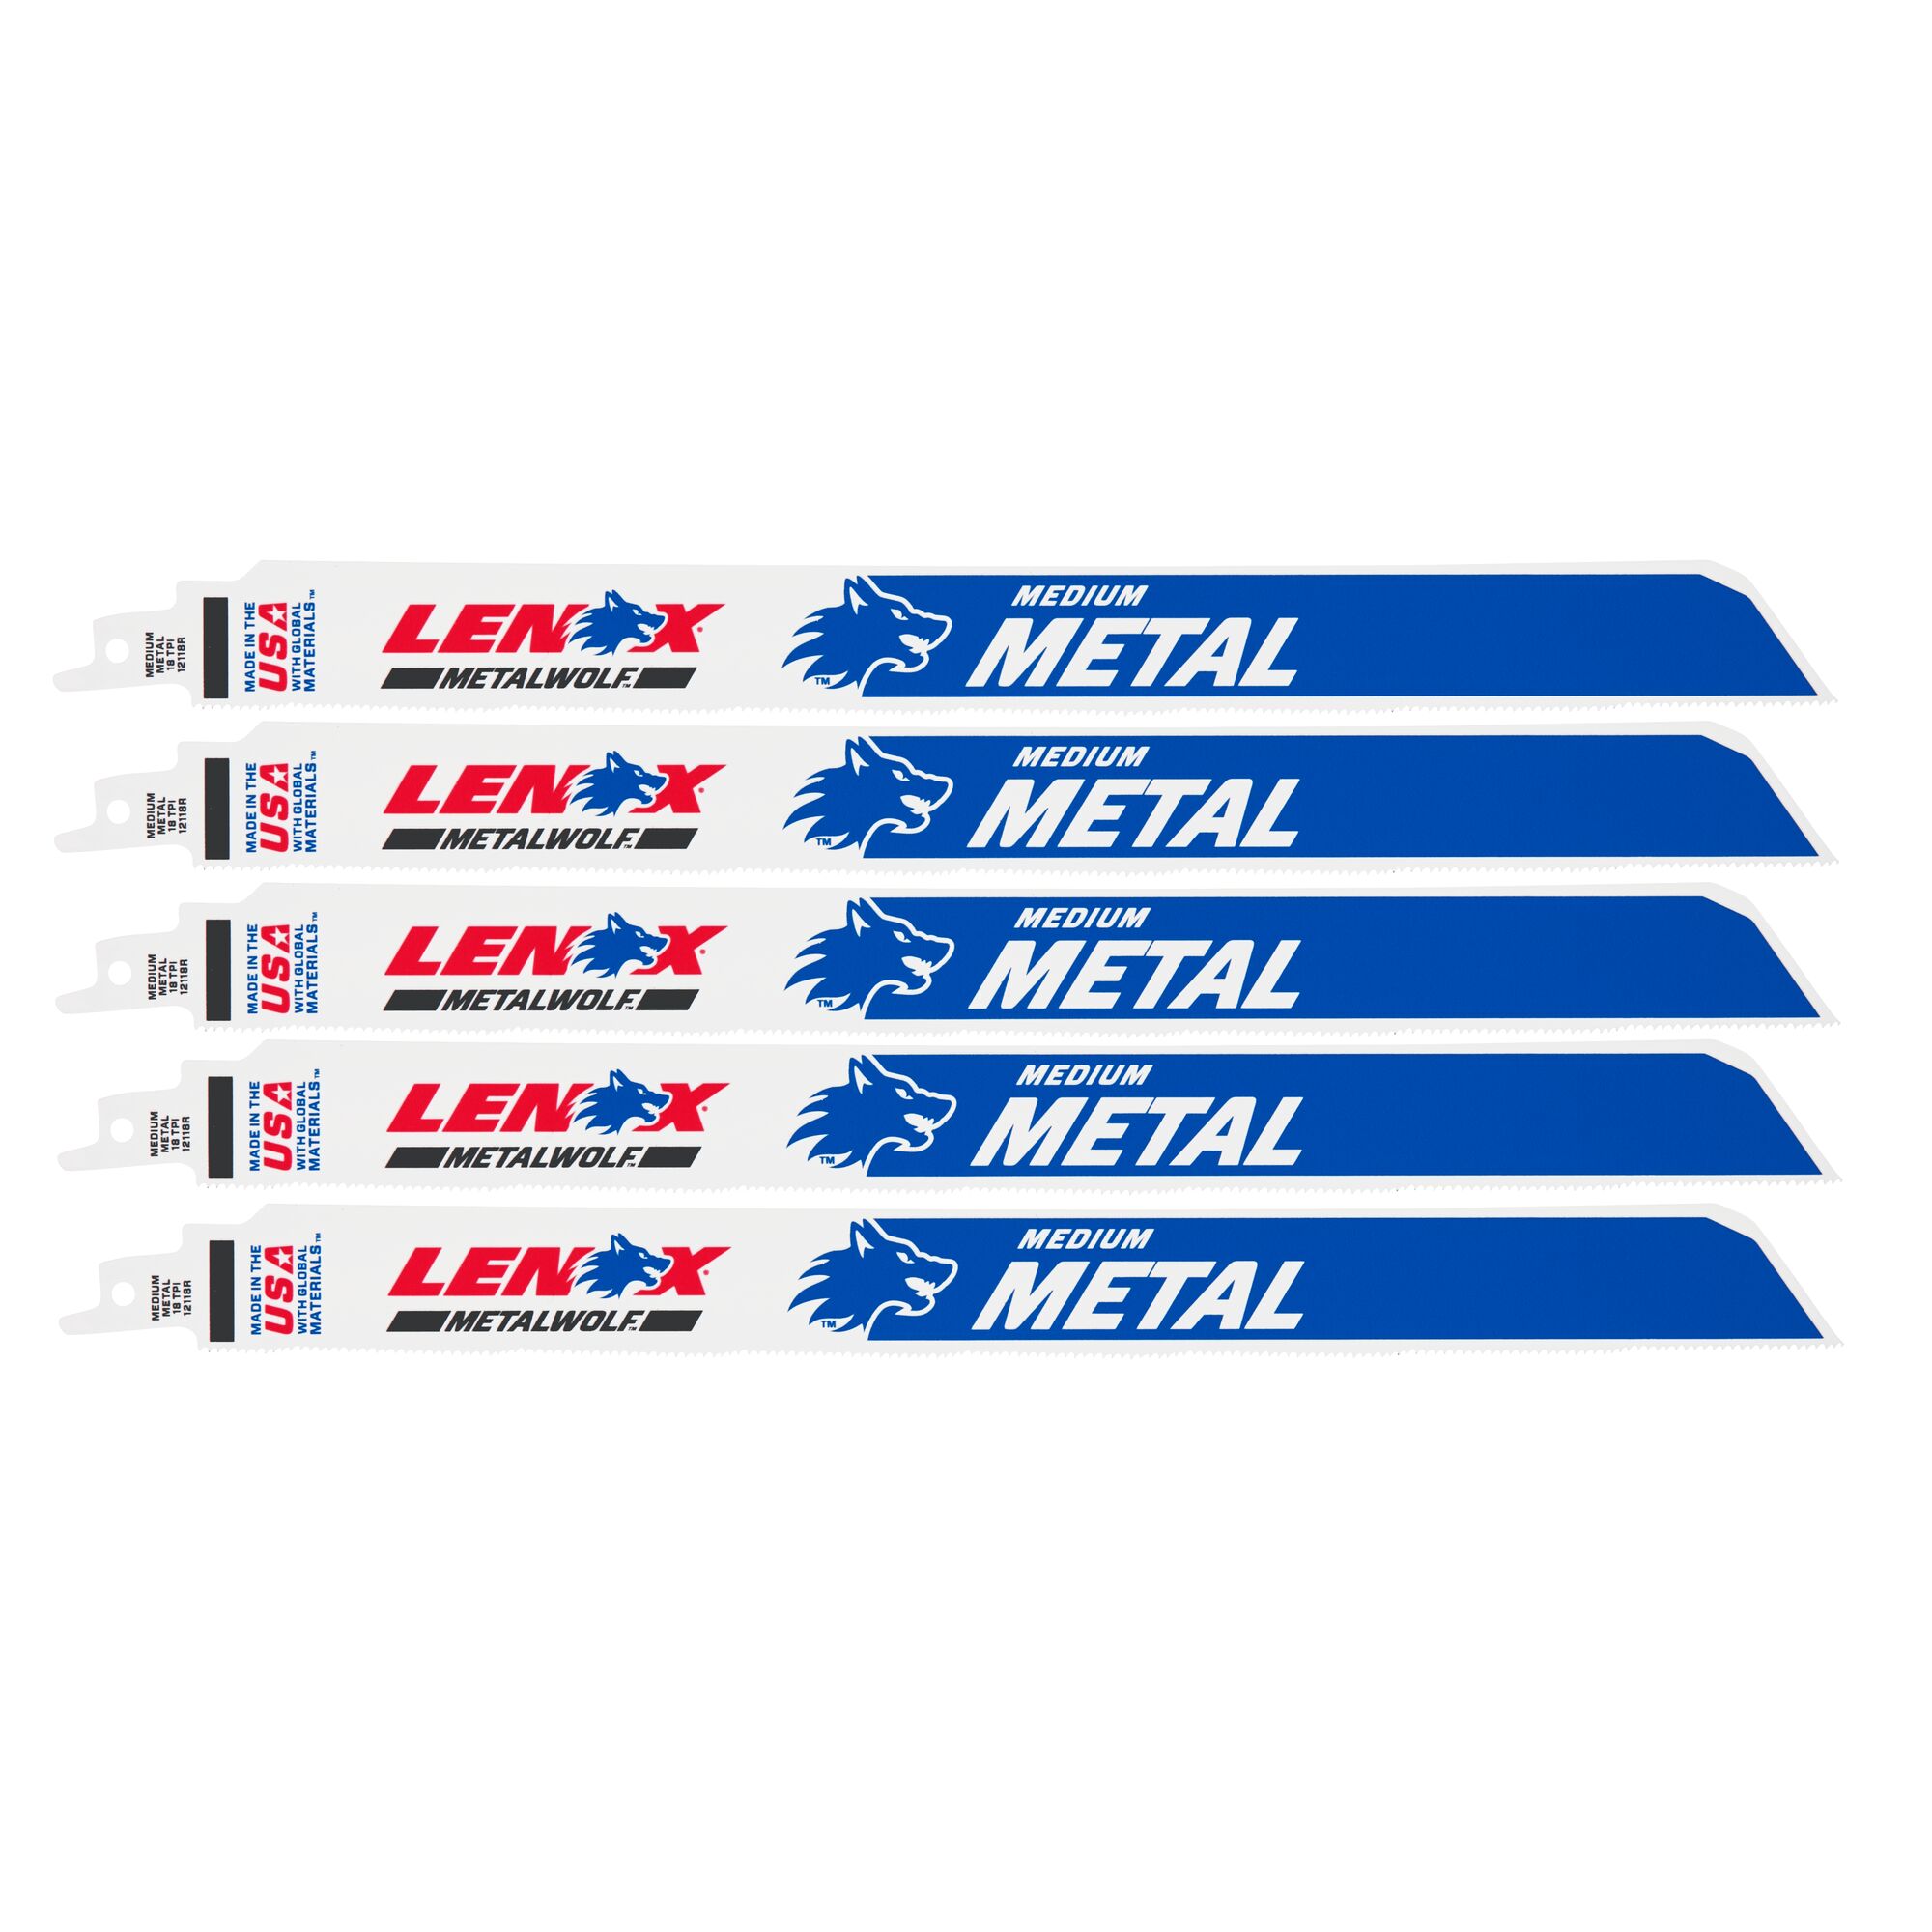 LENOX METALWOLF Bi-metal 12-in 18-TPI Metal Cutting Reciprocating Saw Blade  (5-Pack) in the Reciprocating Saw Blades department at